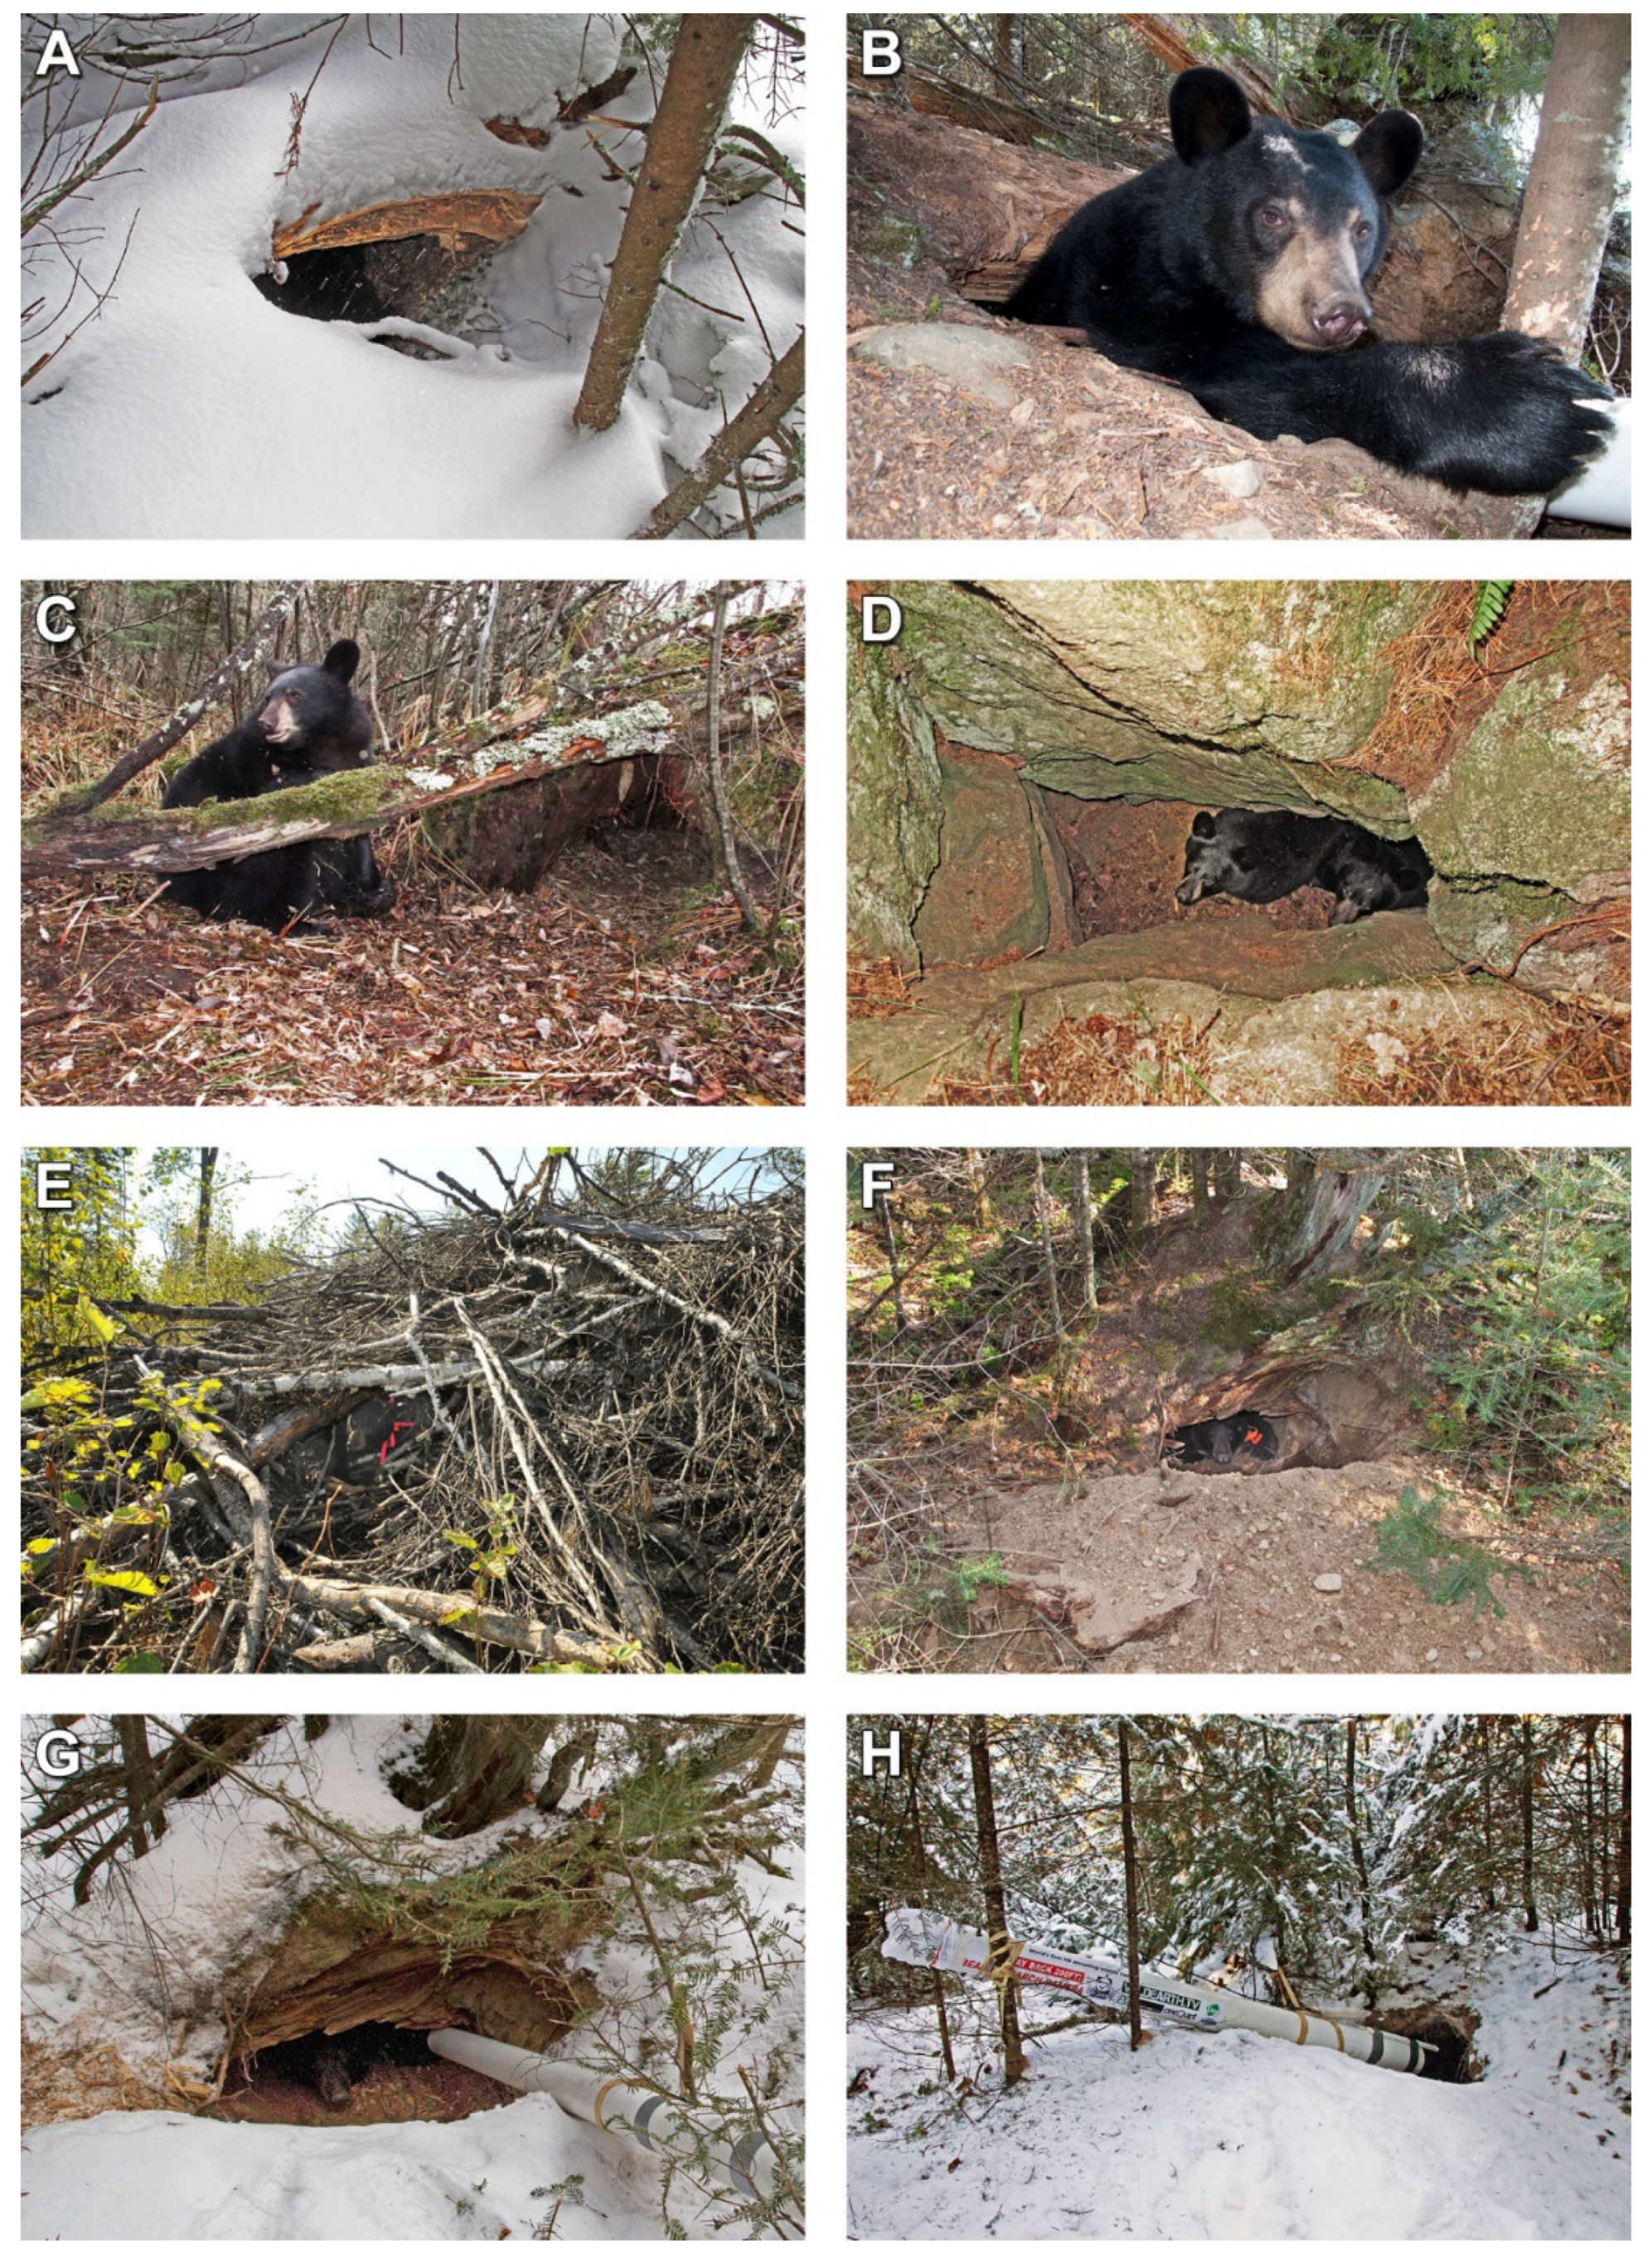 Animals | Free Full-Text | Behavior in Free-Living American Black Bear  Dens: Parturition, Maternal Care, and Cub Behavior